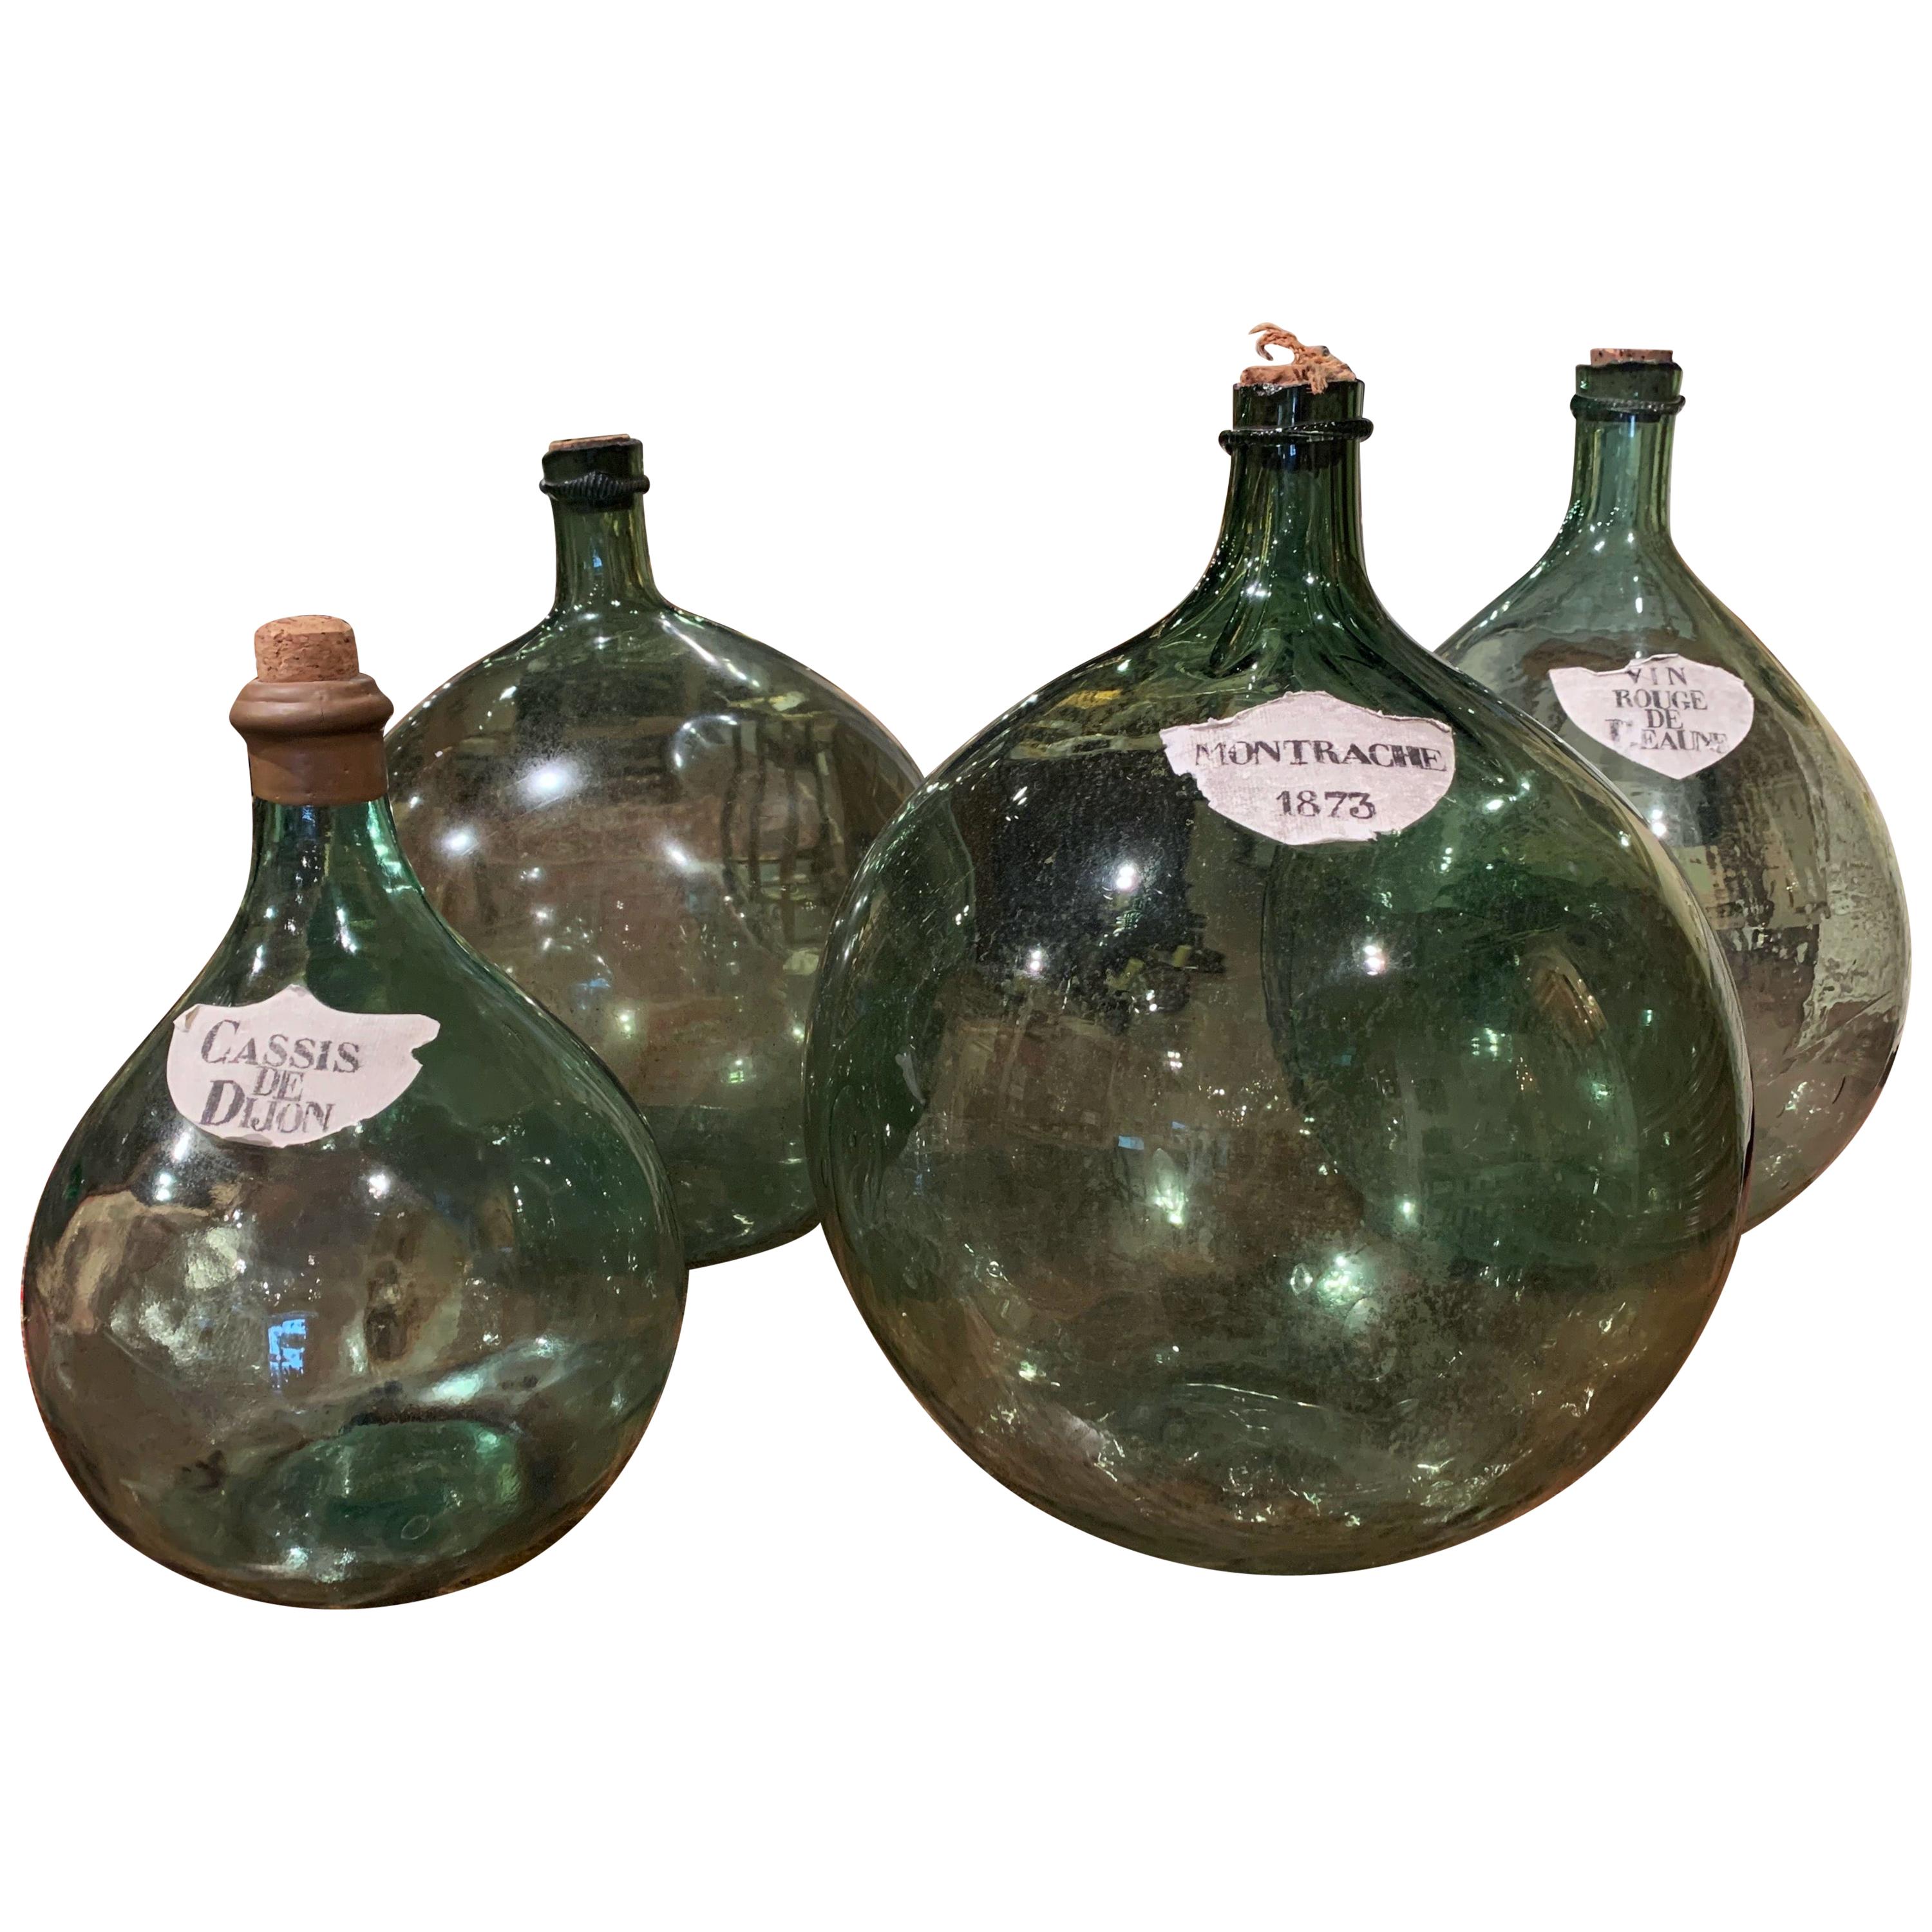 Four 19th Century French Hand Blown Glass Wine Bottles with Decorative Labels